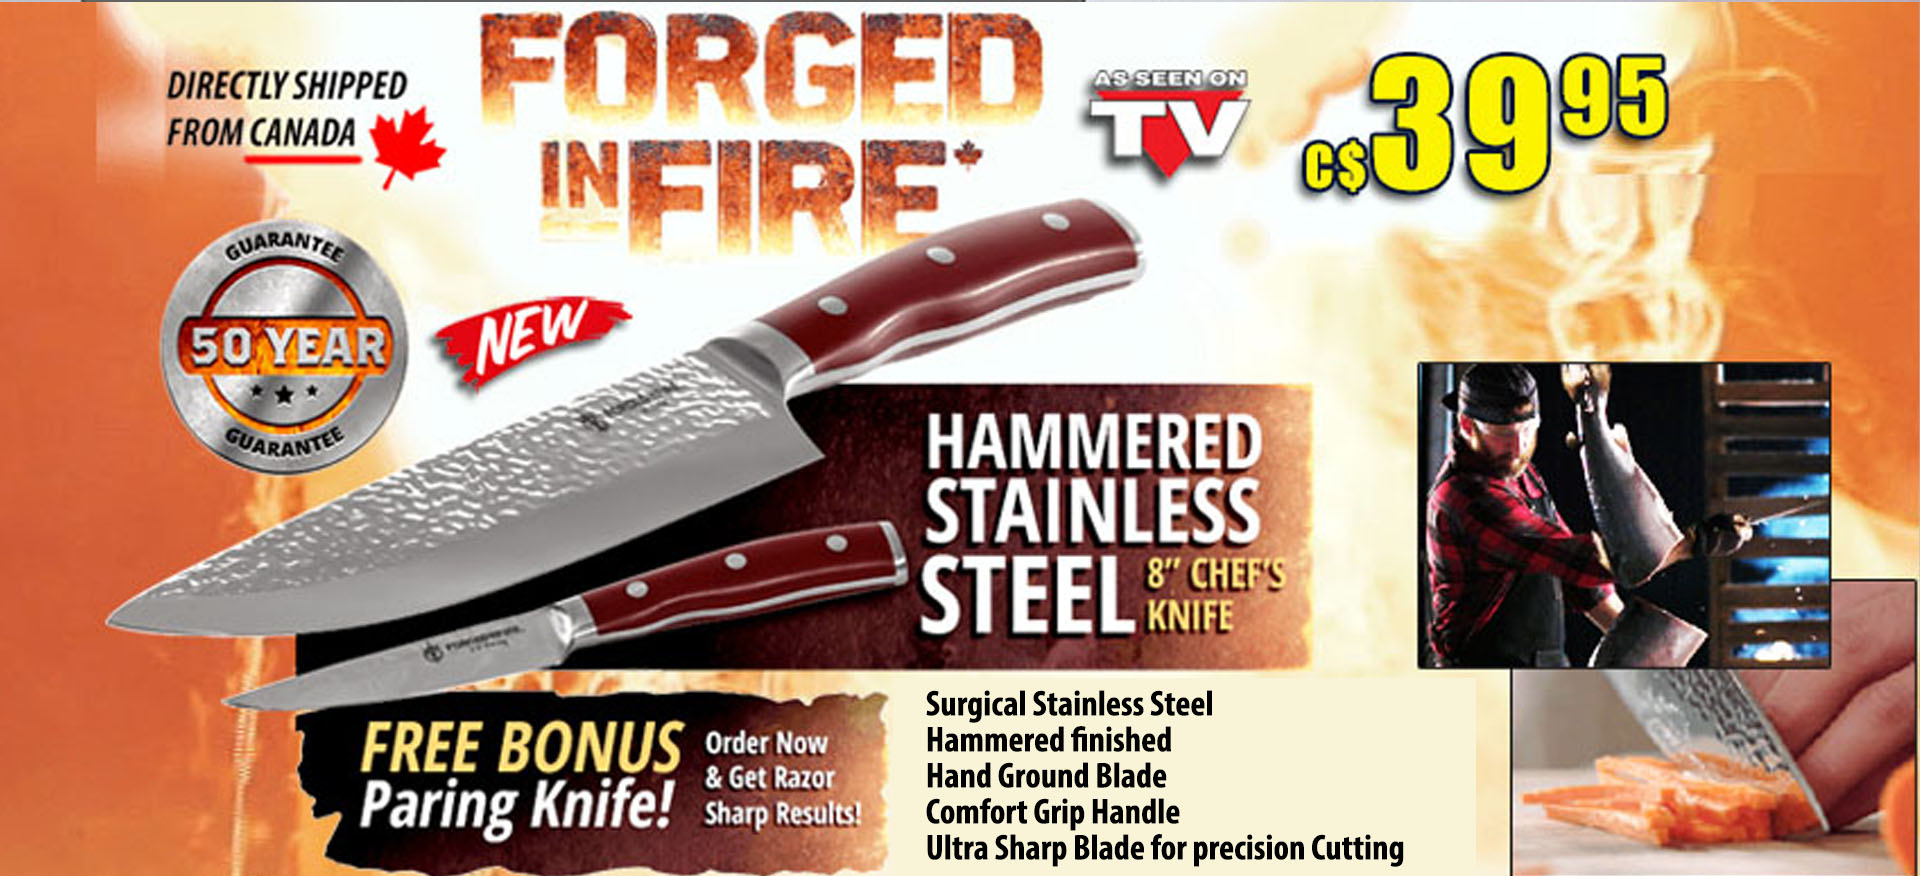 Forged in Fire Knife